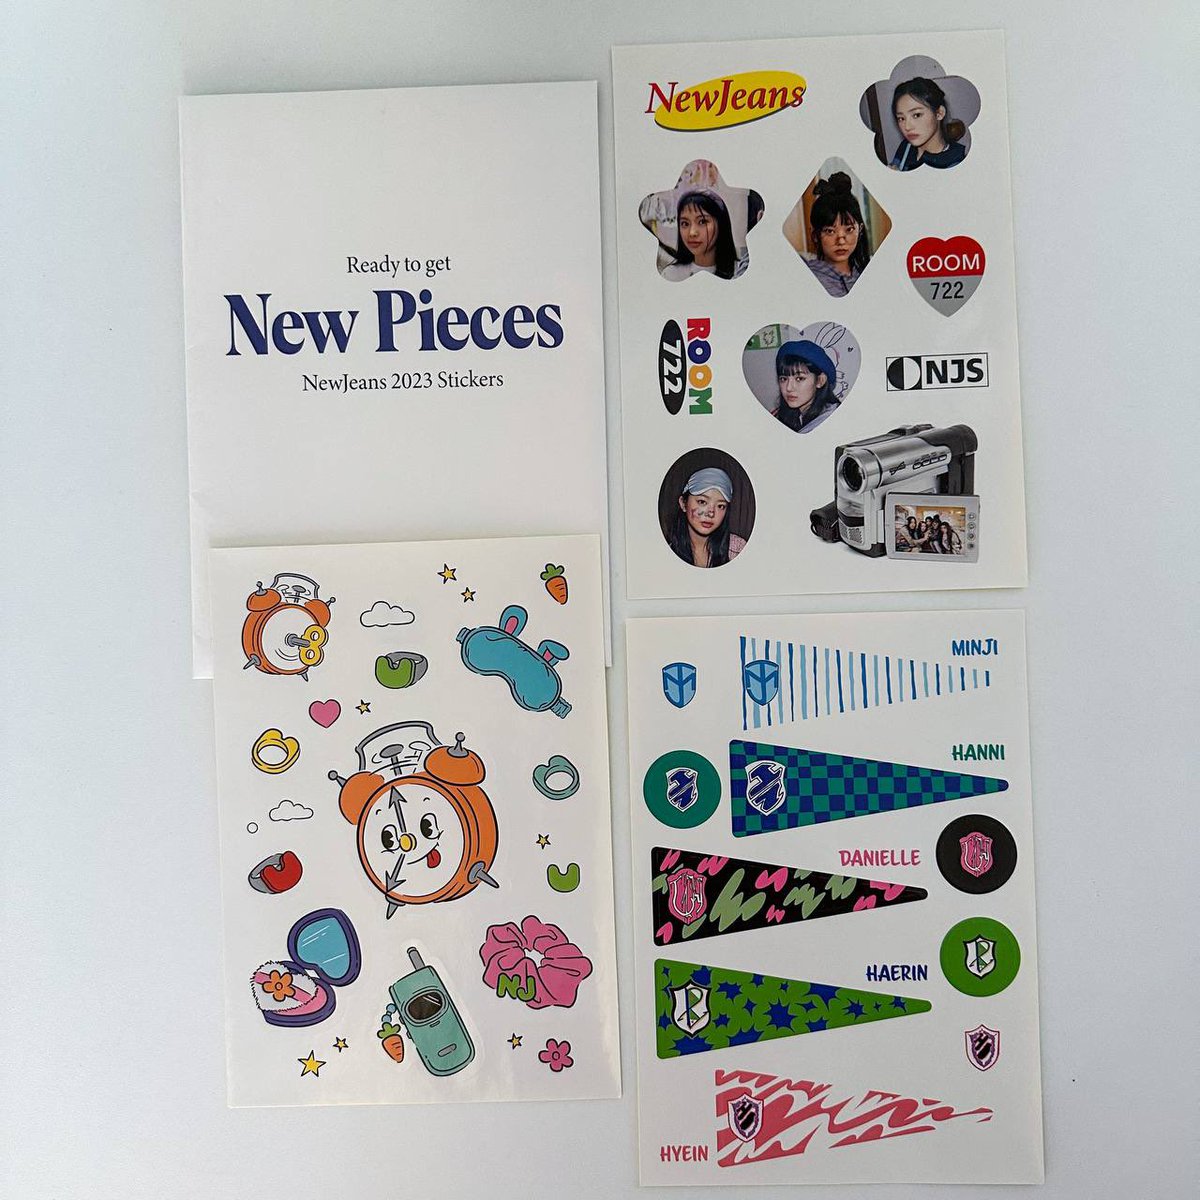 declutter SALE — all on hand 🩷

🍒 new pieces sticker pack

• ₱200 set + pf
• payo / 3 days / sco / jnt
• dm to buy

🏷️ wts lfb ph nwjns newjeans seasons greetings 2023 minji haerin danielle hanni hyein ww ina sg my th ch vn kr jp us uk eu can